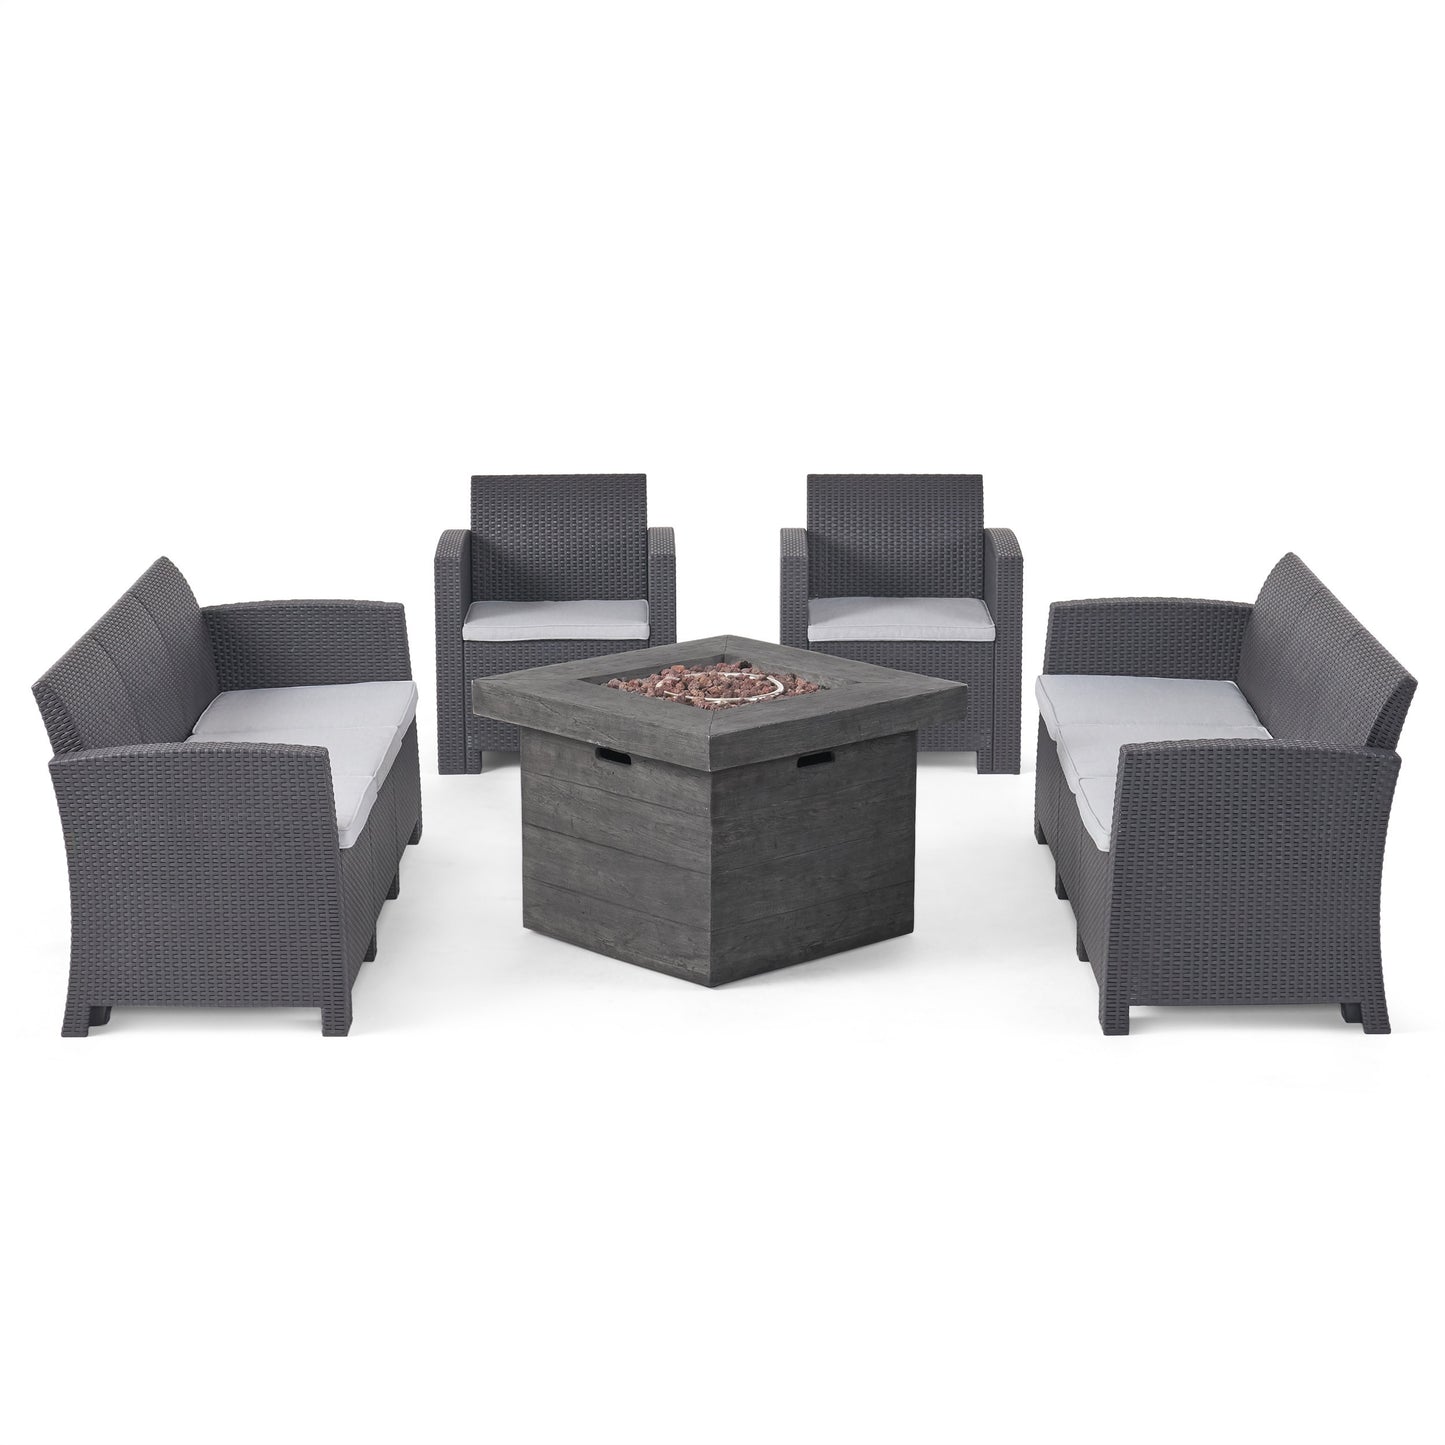 Irwin Outdoor 8-Seater Wicker Print Chat Set with Fire Pit